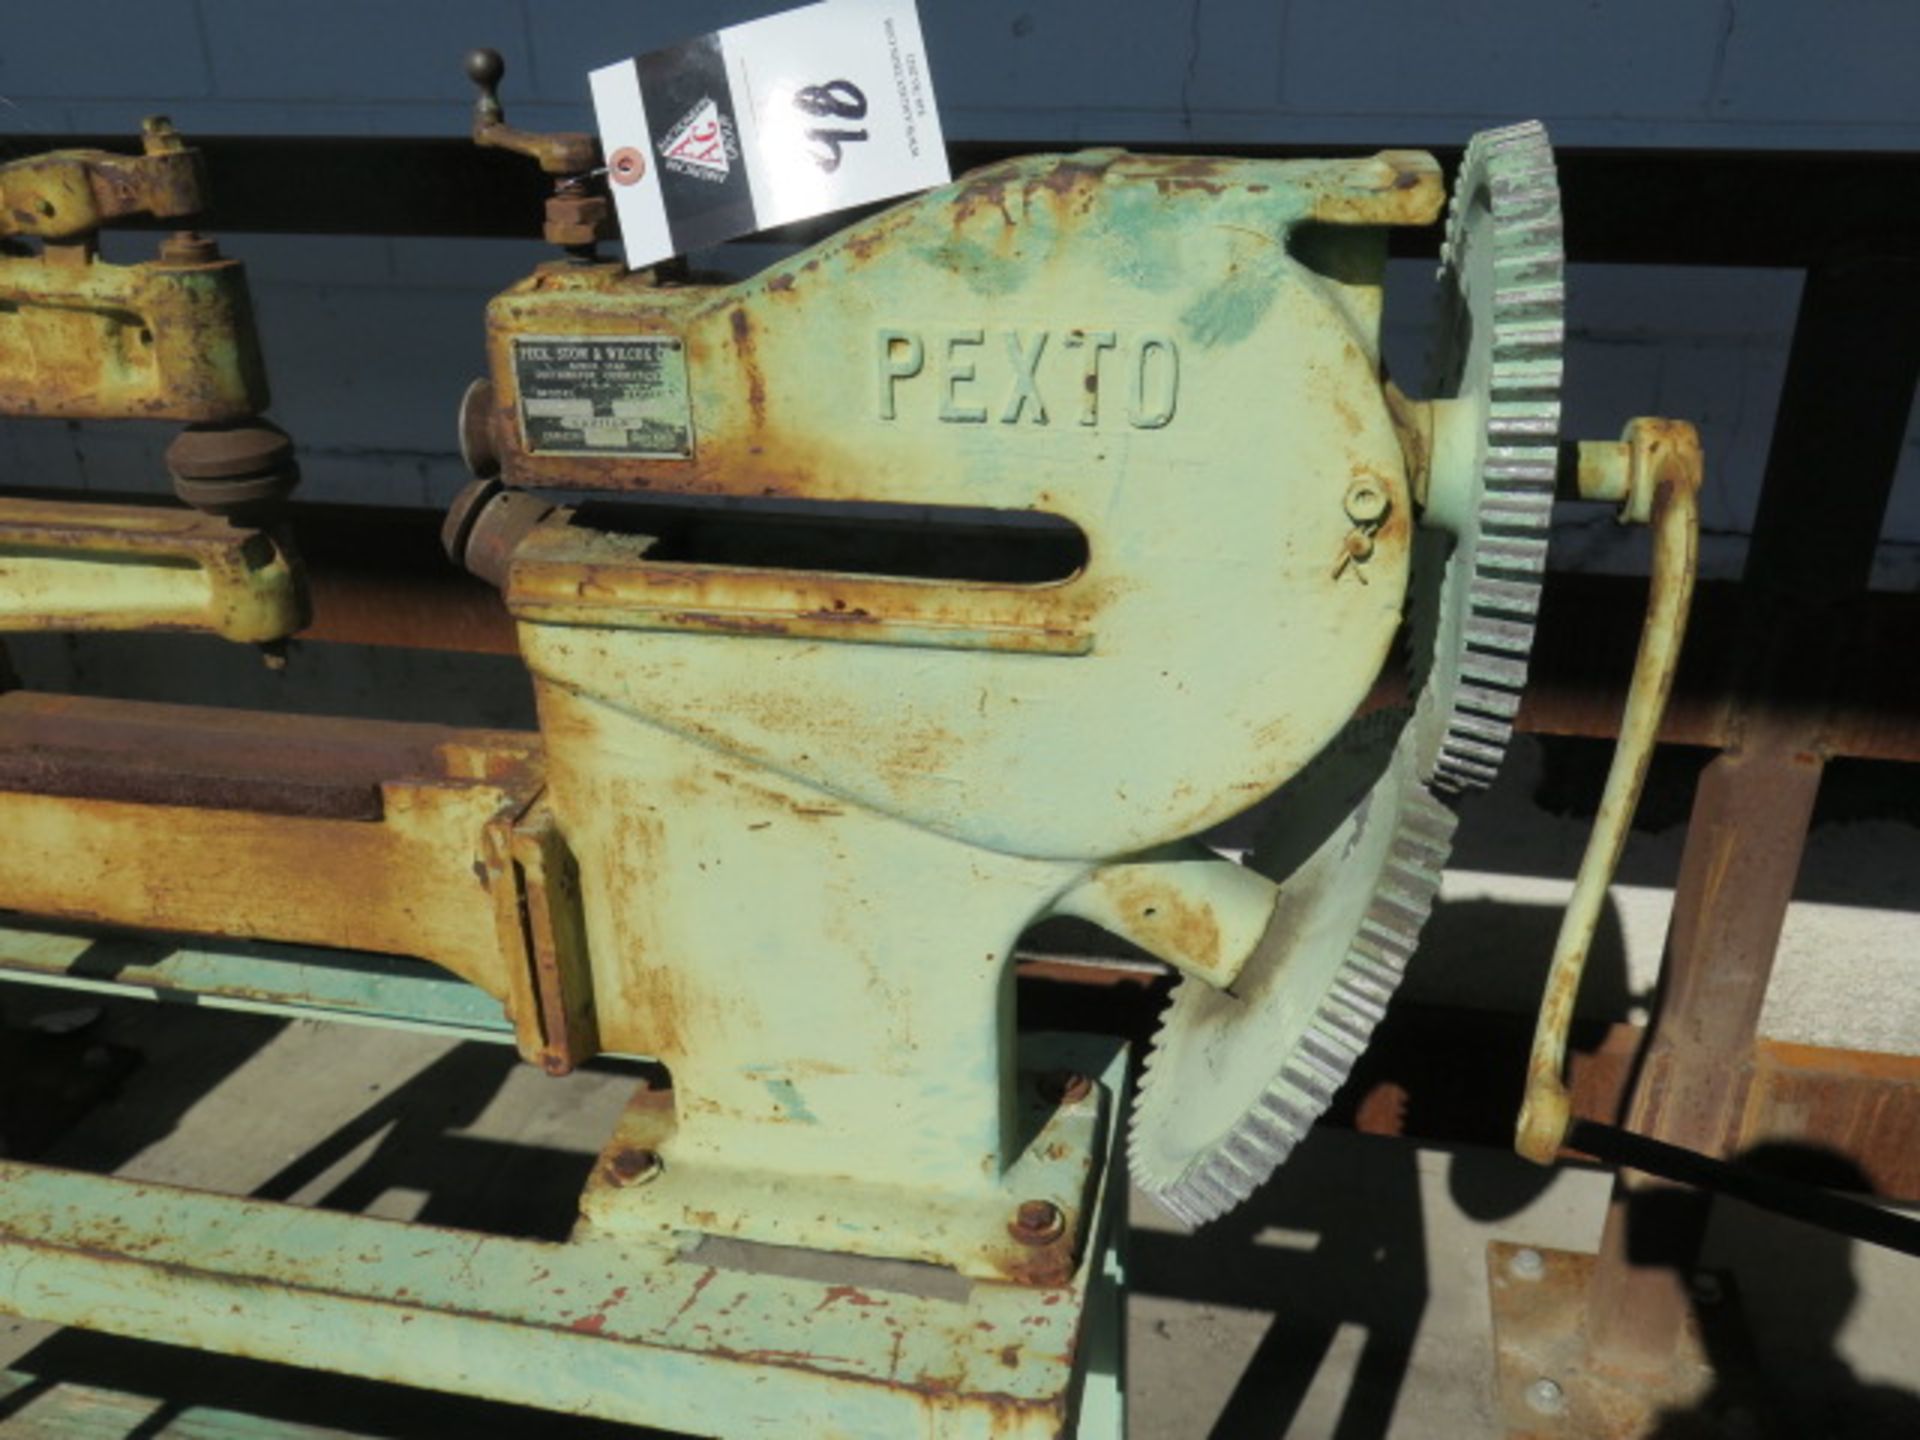 Pexto mdl. 299-C 20GA x 60” Circle Shear s/n 12/71 (SOLD AS-IS - NO WARRANTY) - Image 5 of 8